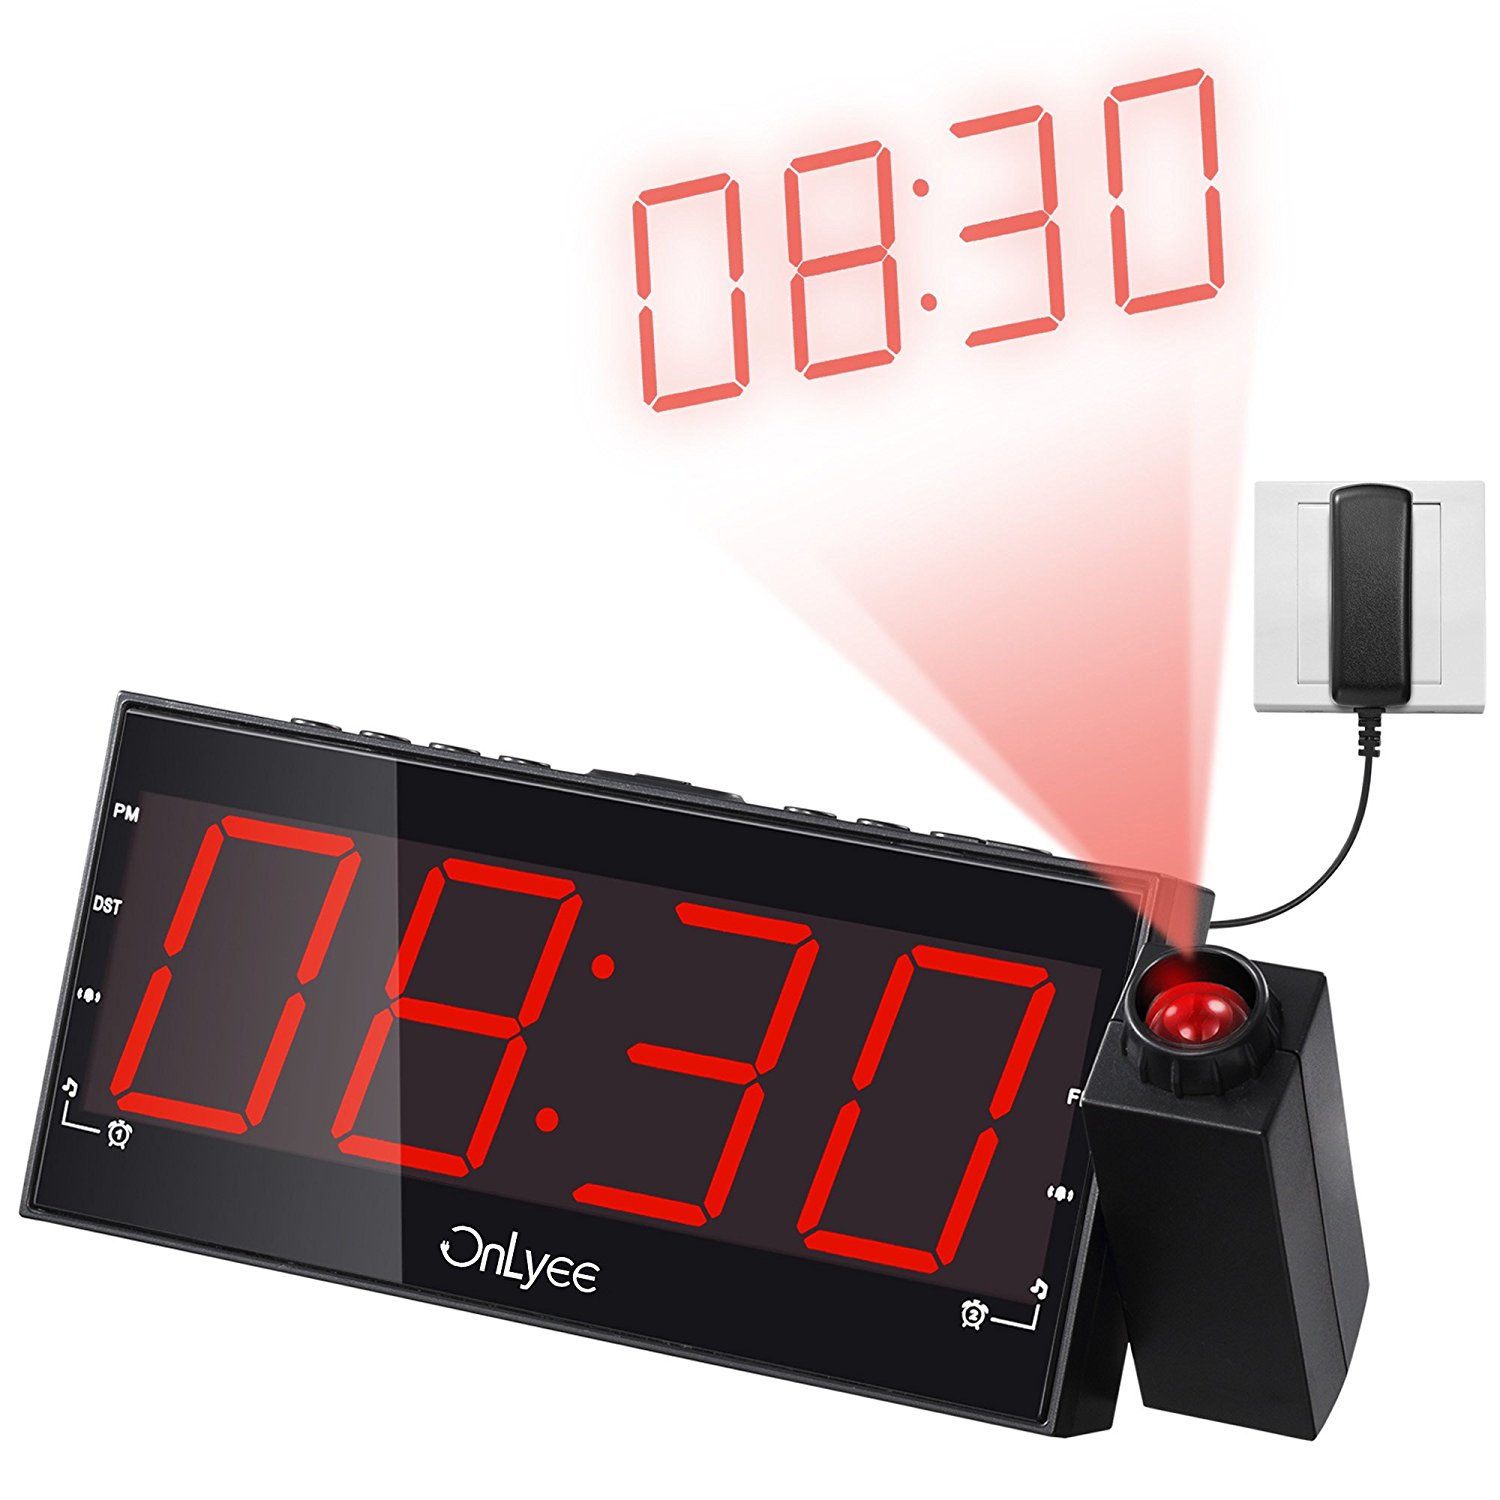 OnLyee Digital LED Dimmable Projection Alarm Clock Radio with AM/FM,USB Charging Port